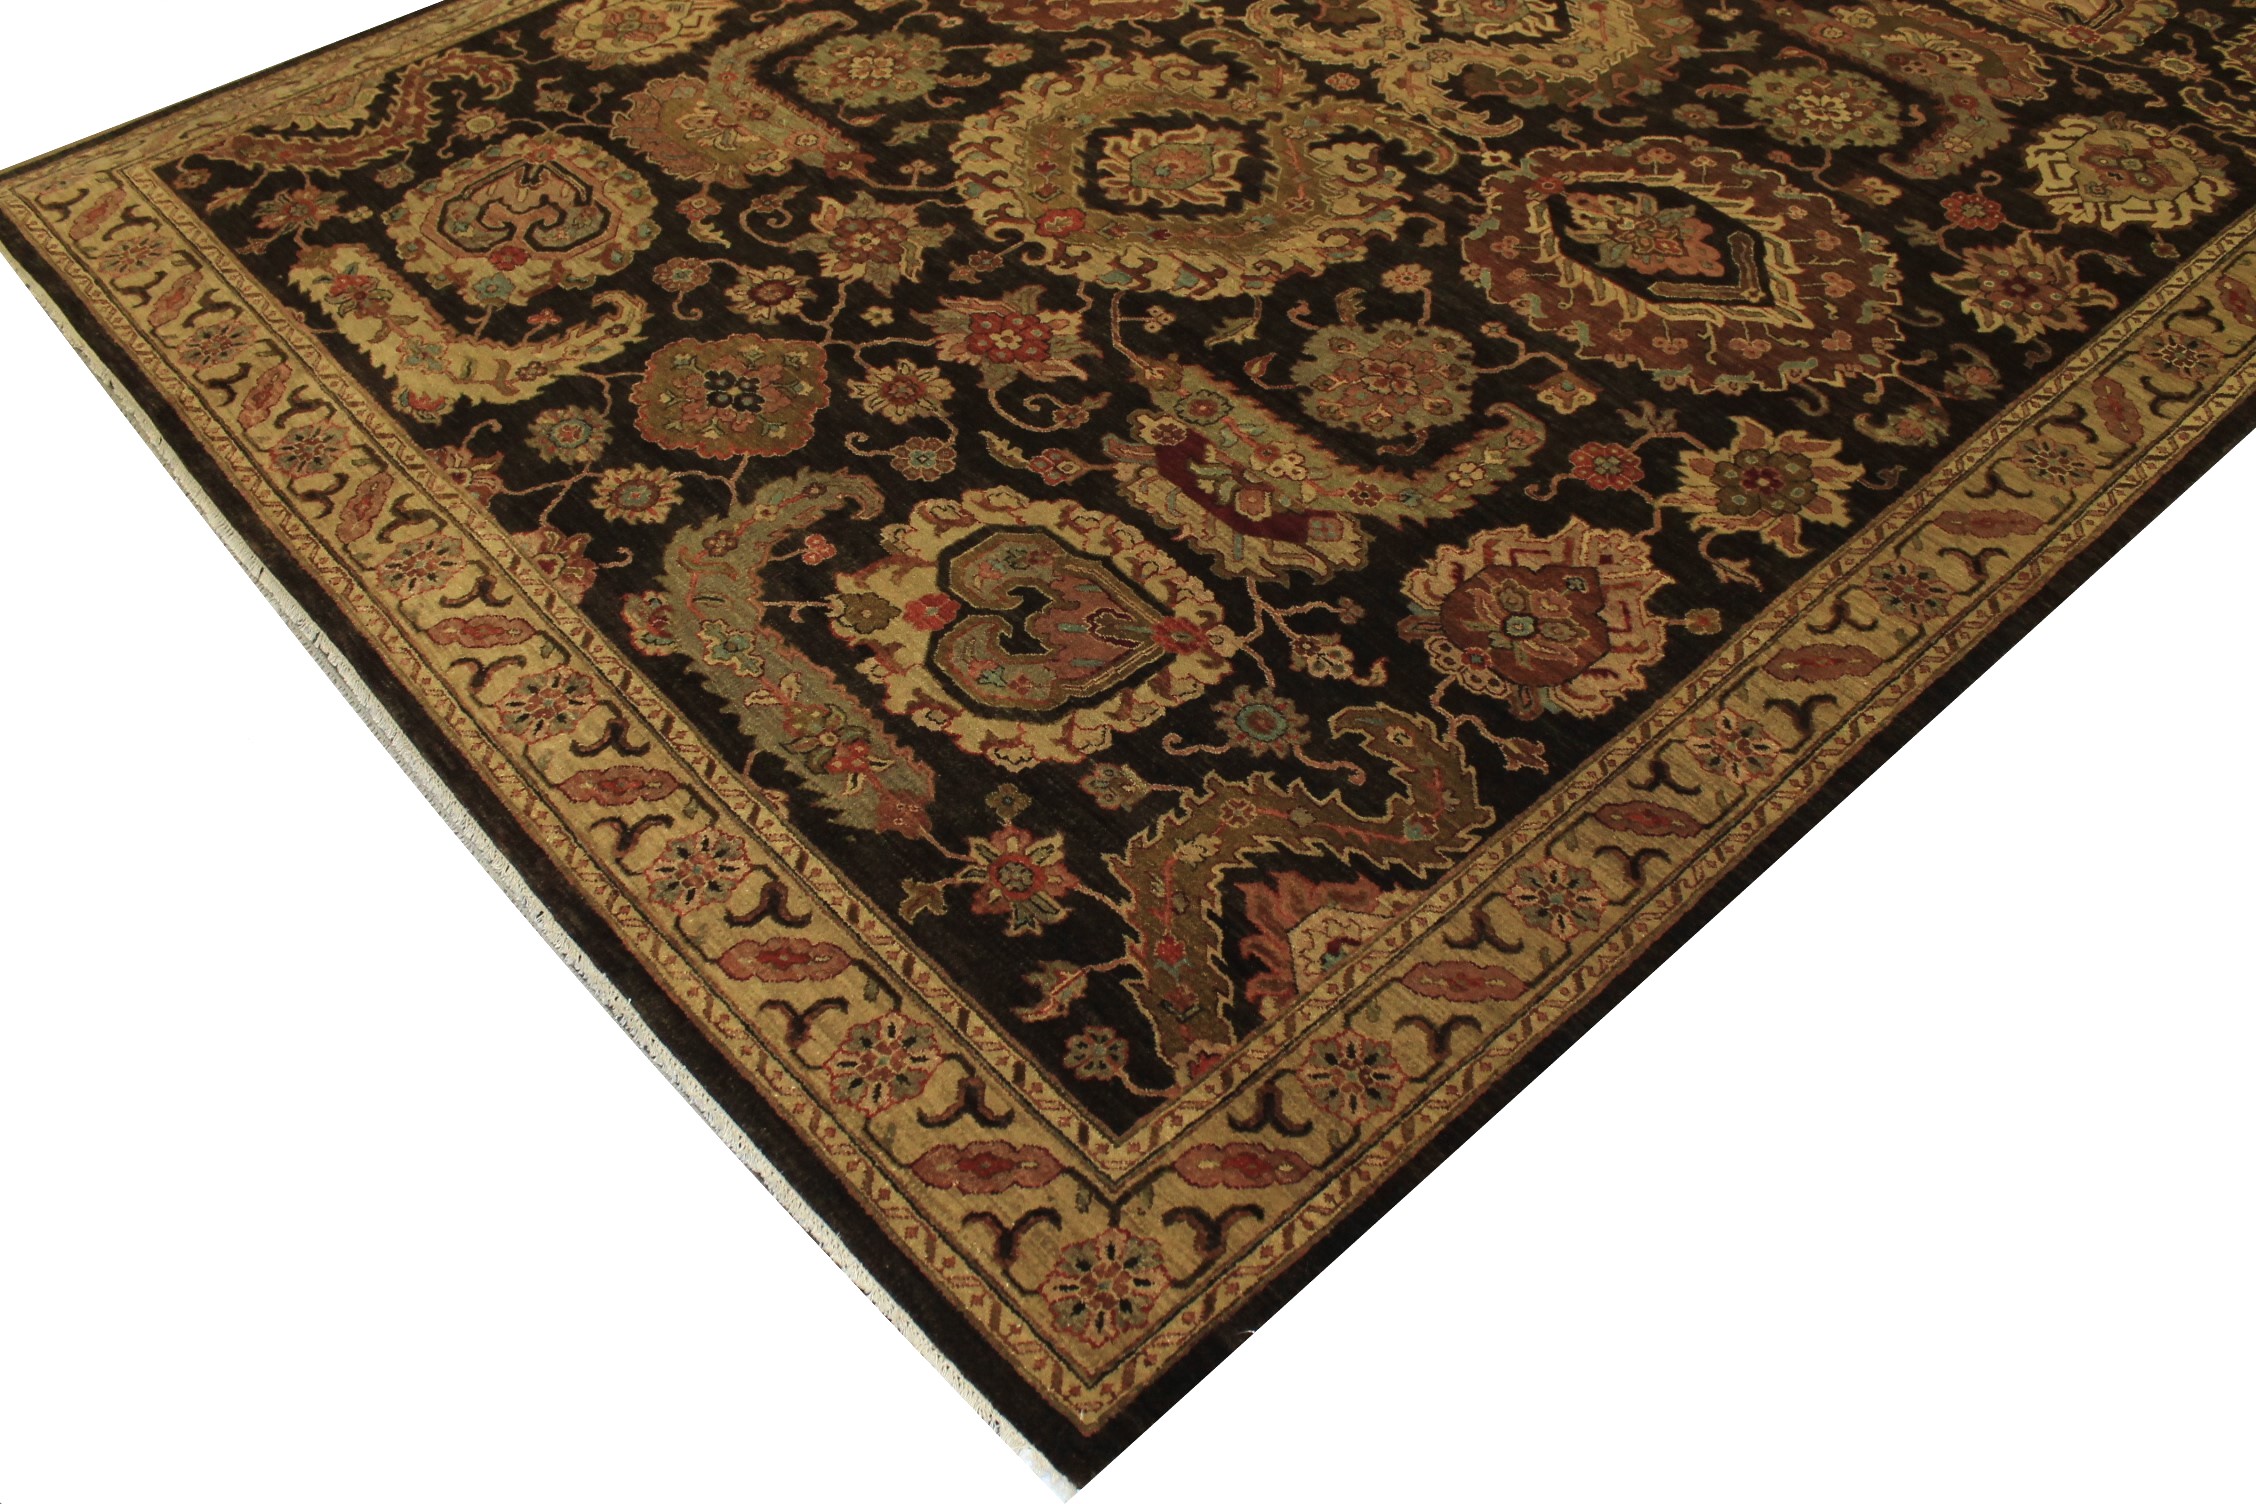 8x10 Antique Revival Hand Knotted Wool Area Rug - MR14302